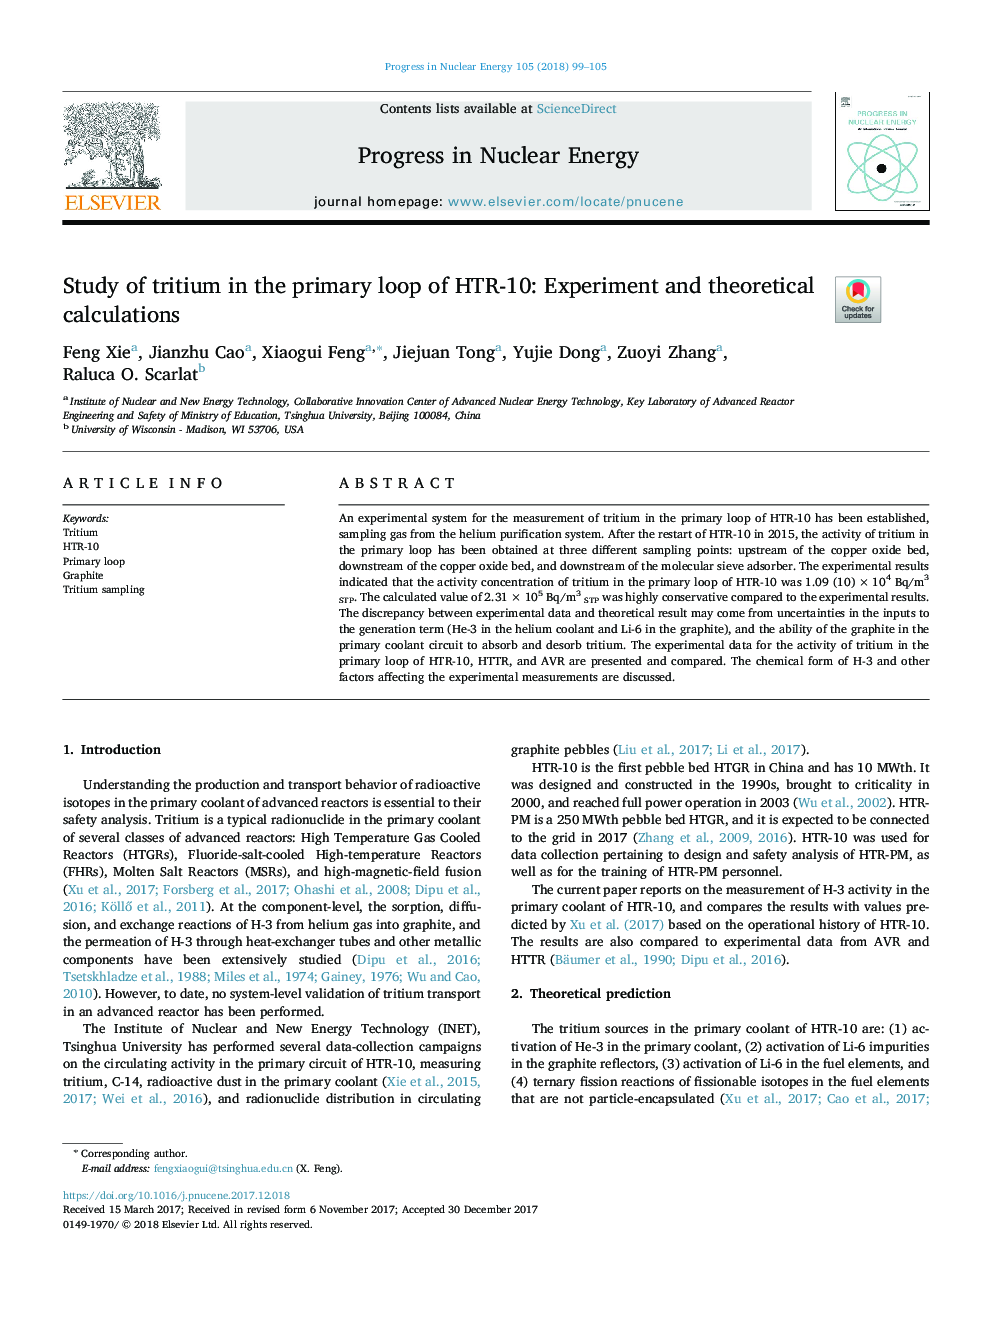 Study of tritium in the primary loop of HTR-10: Experiment and theoretical calculations